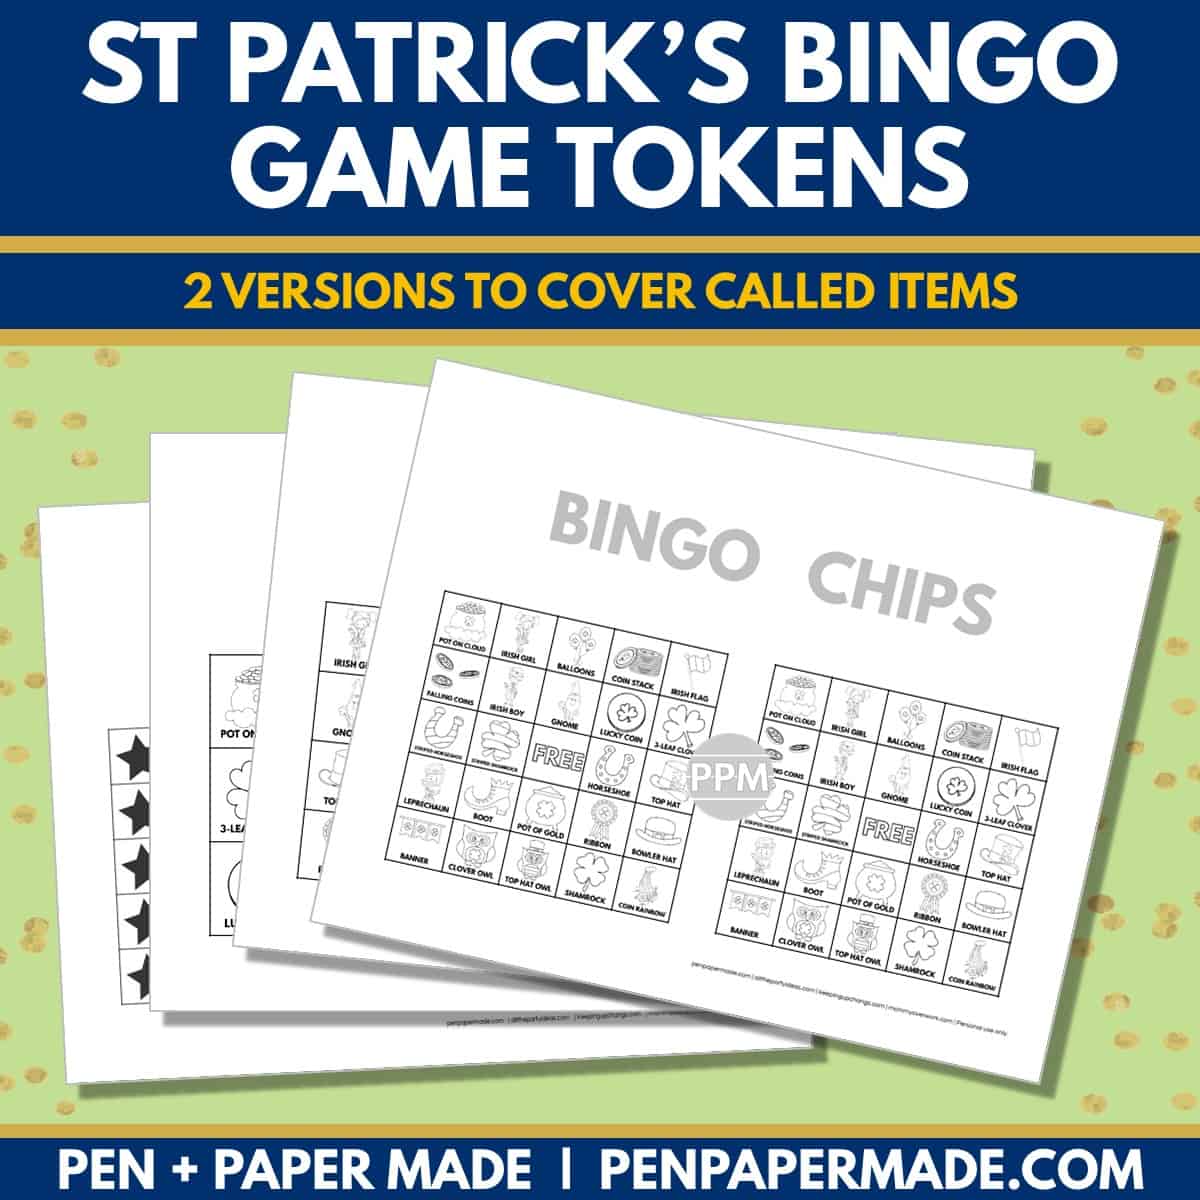 st. patrick's day bingo card 5x5, 4x4, 3x3 game chips, tokens, markers.